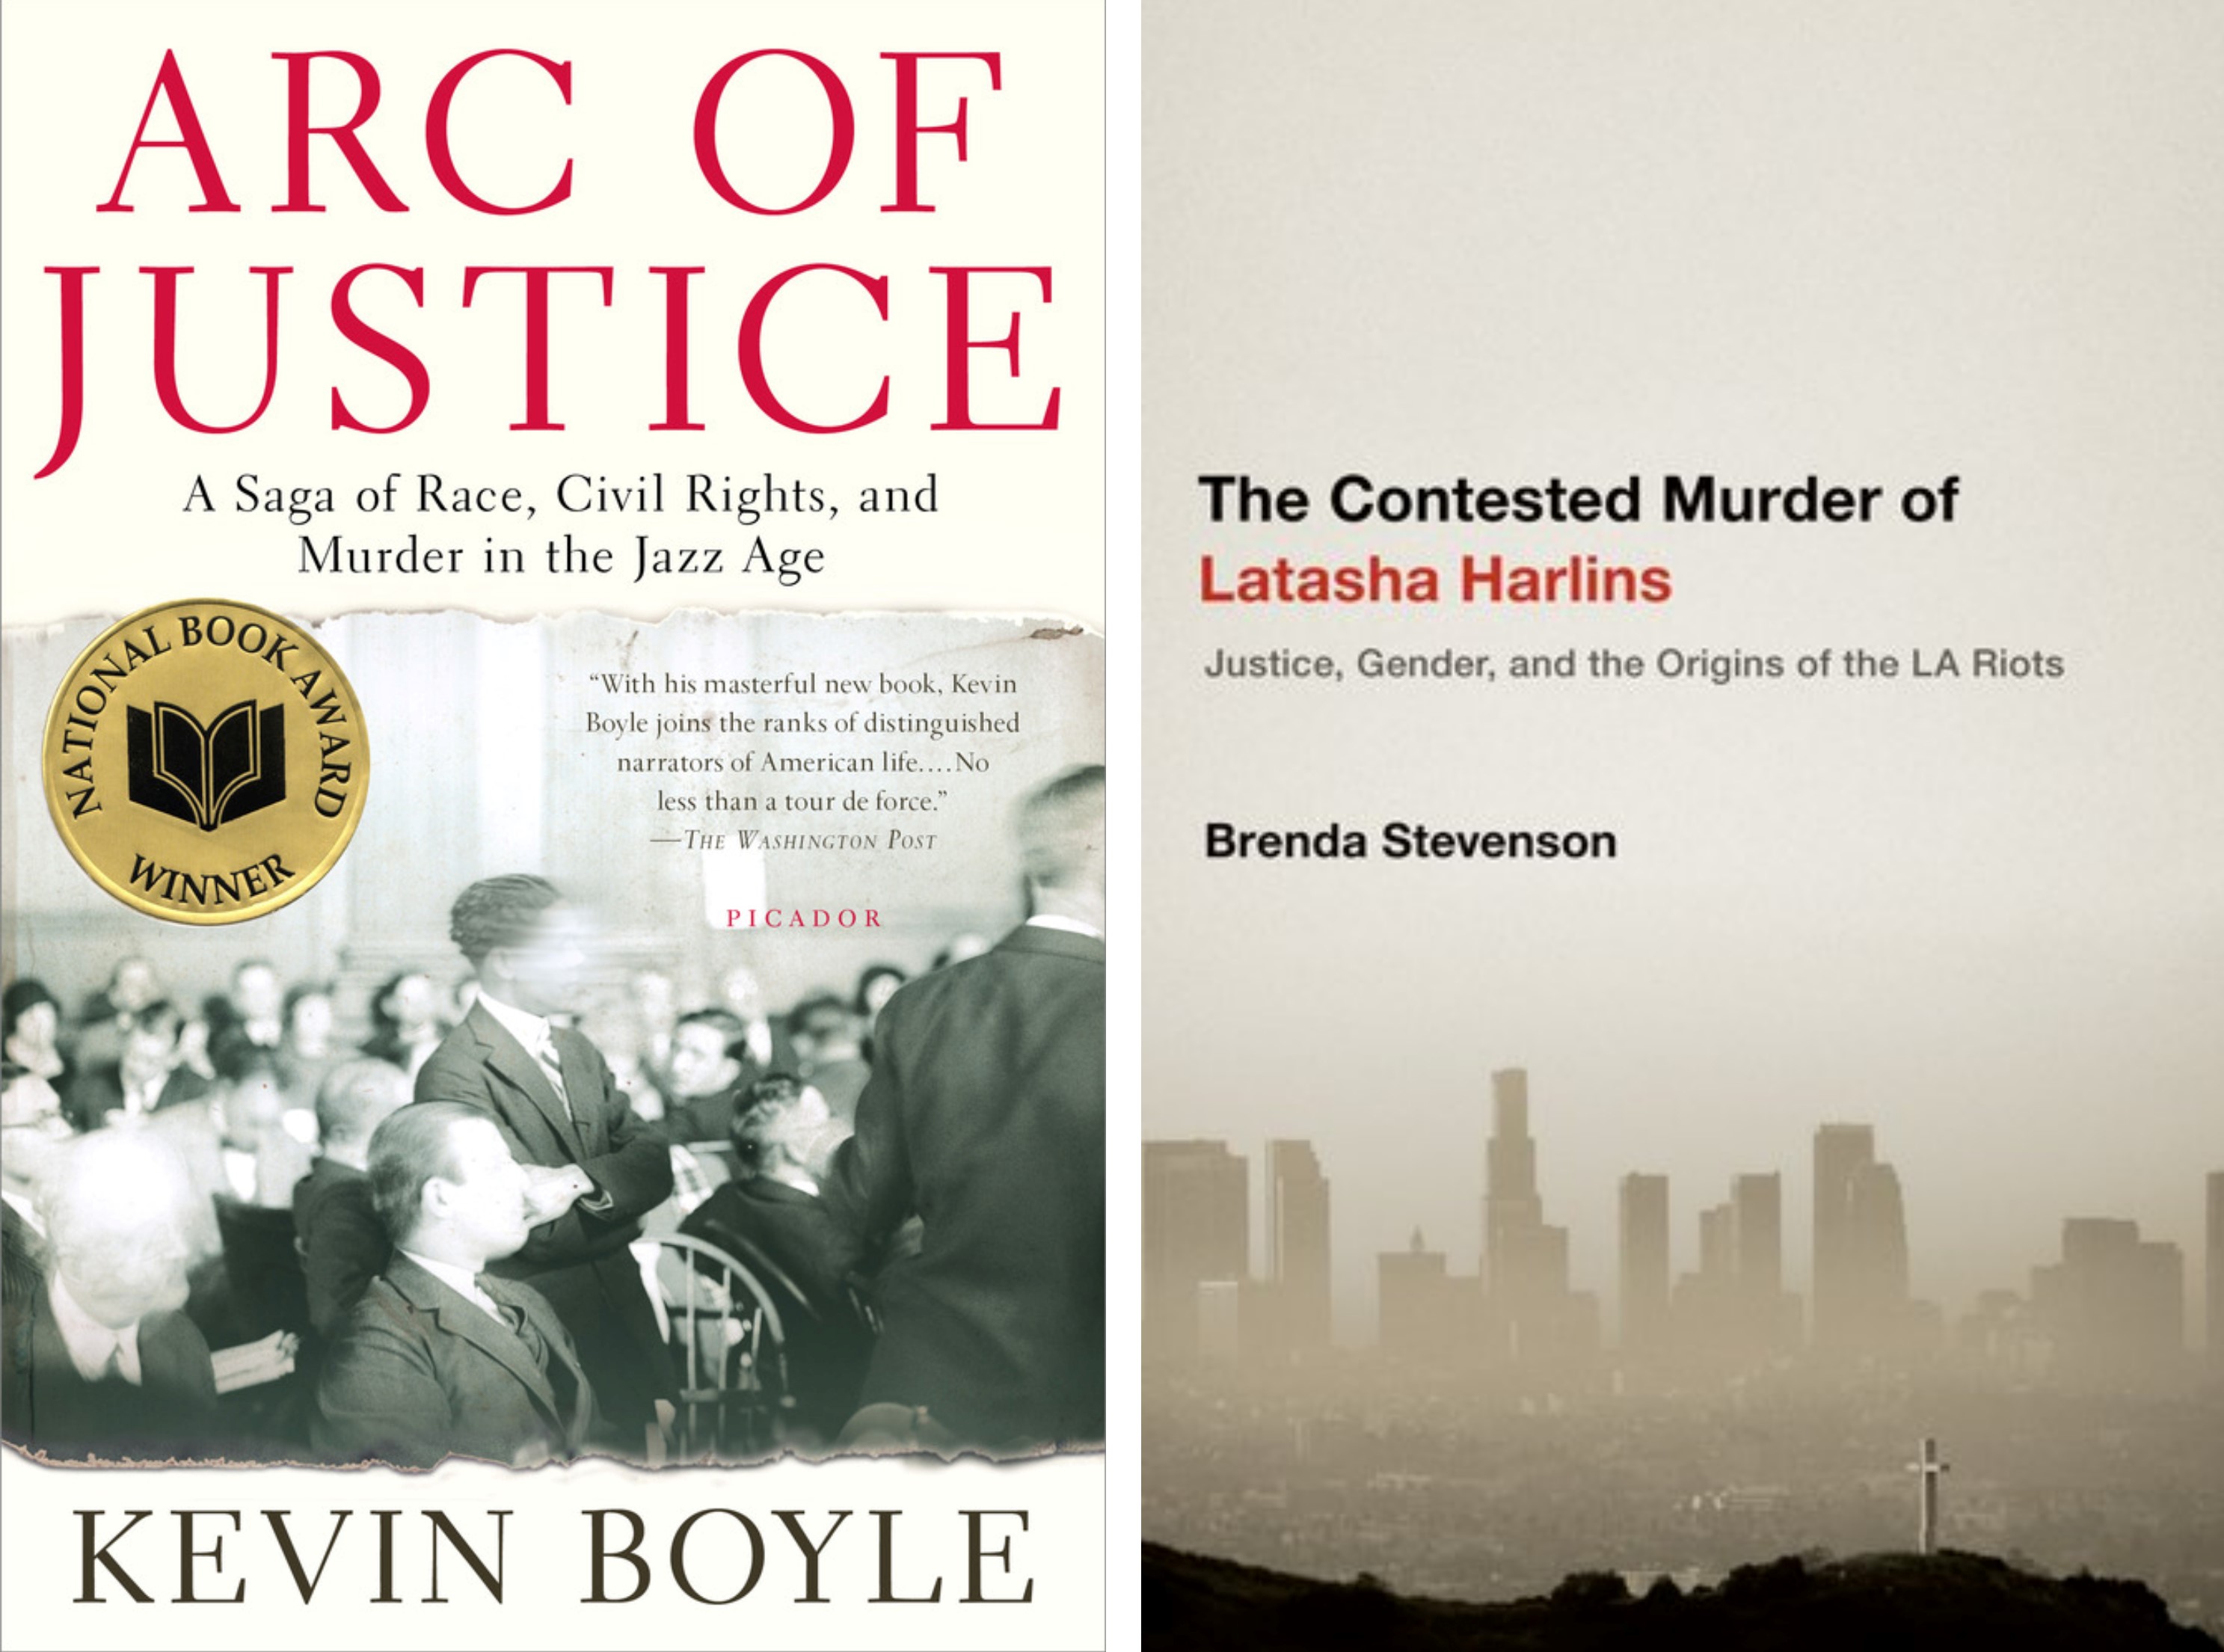 On the left, the cover of 'Arc of Justice.' On the right, the cover of 'The Contested Murder of Latasha Harlins.'